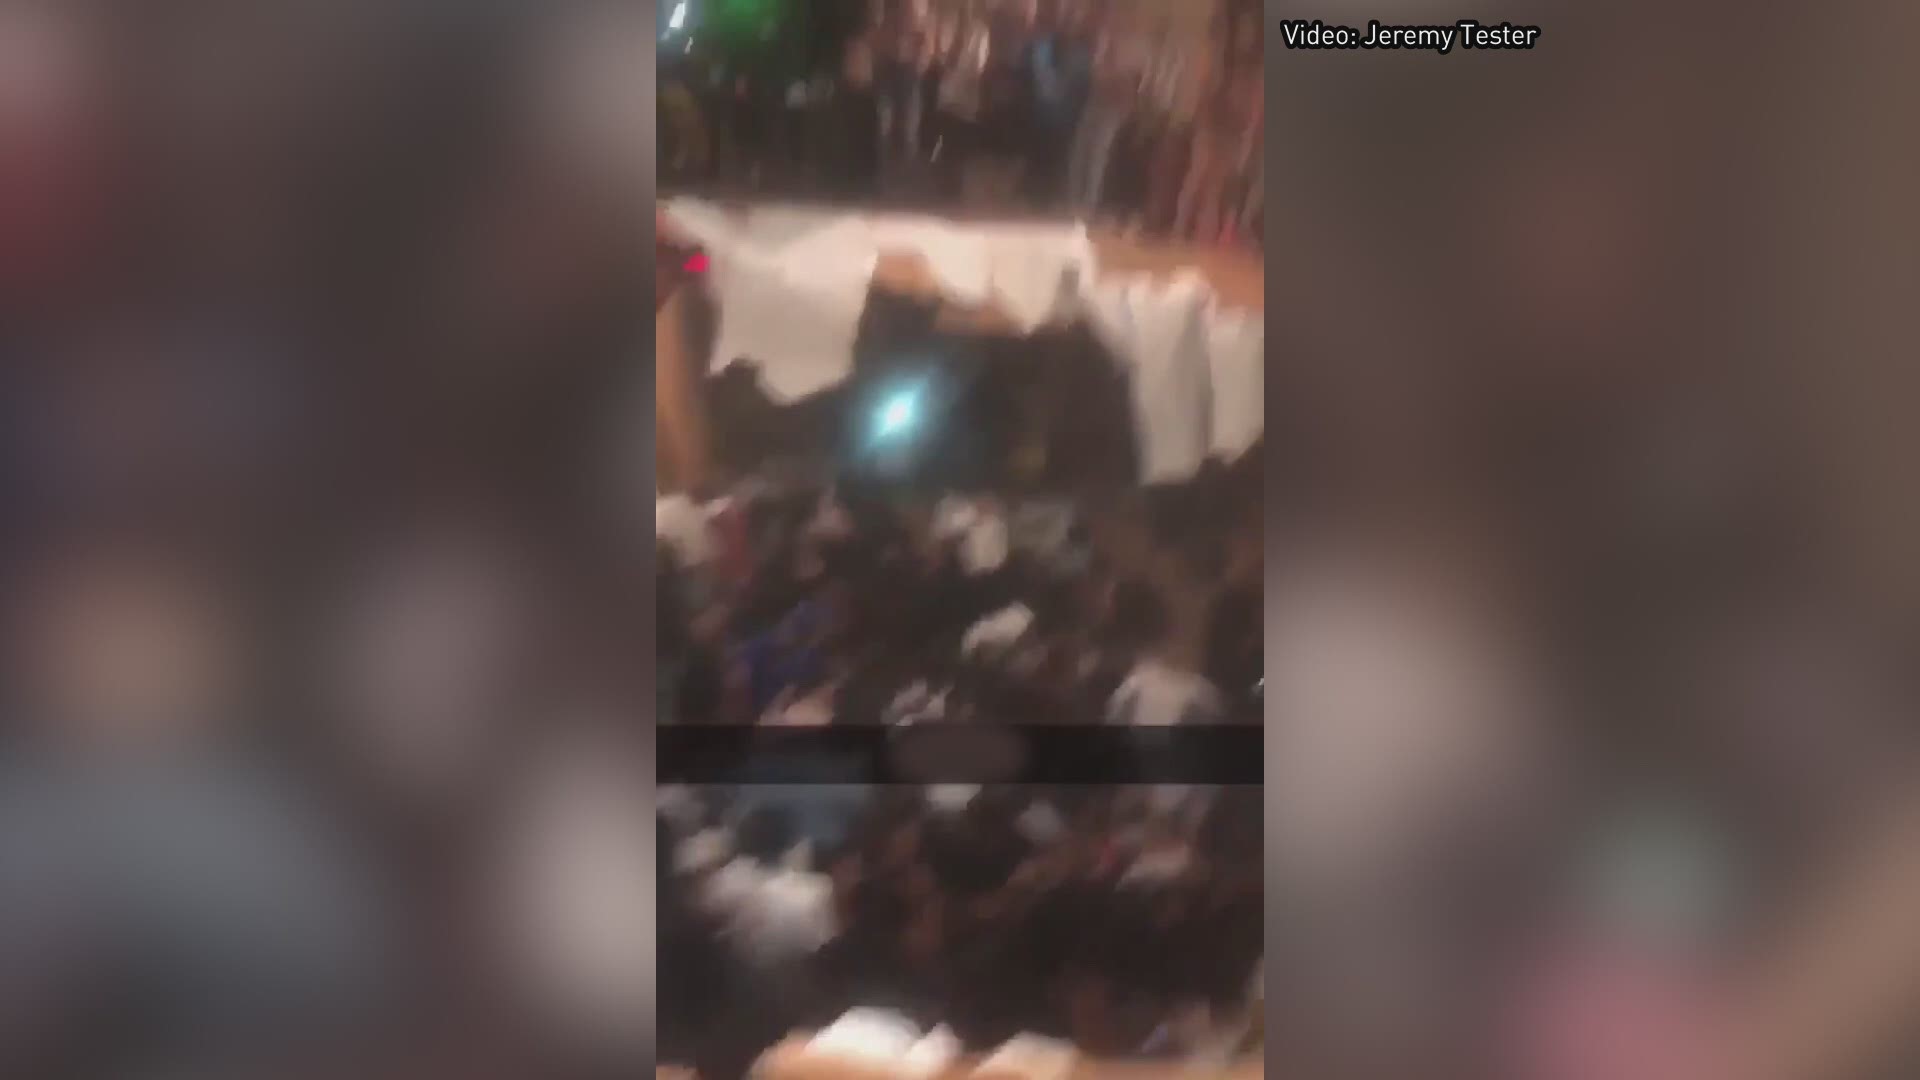 Dozens were injured after a floor collapsed during a party at an apartment clubhouse in Clemson early Sunday. Footage obtained from one of the partygoers shows the collapsed floor and young people who fell through to the ground level of the building. WARNING: GRAPHIC CONTENT (Video: Jeremy Tester)